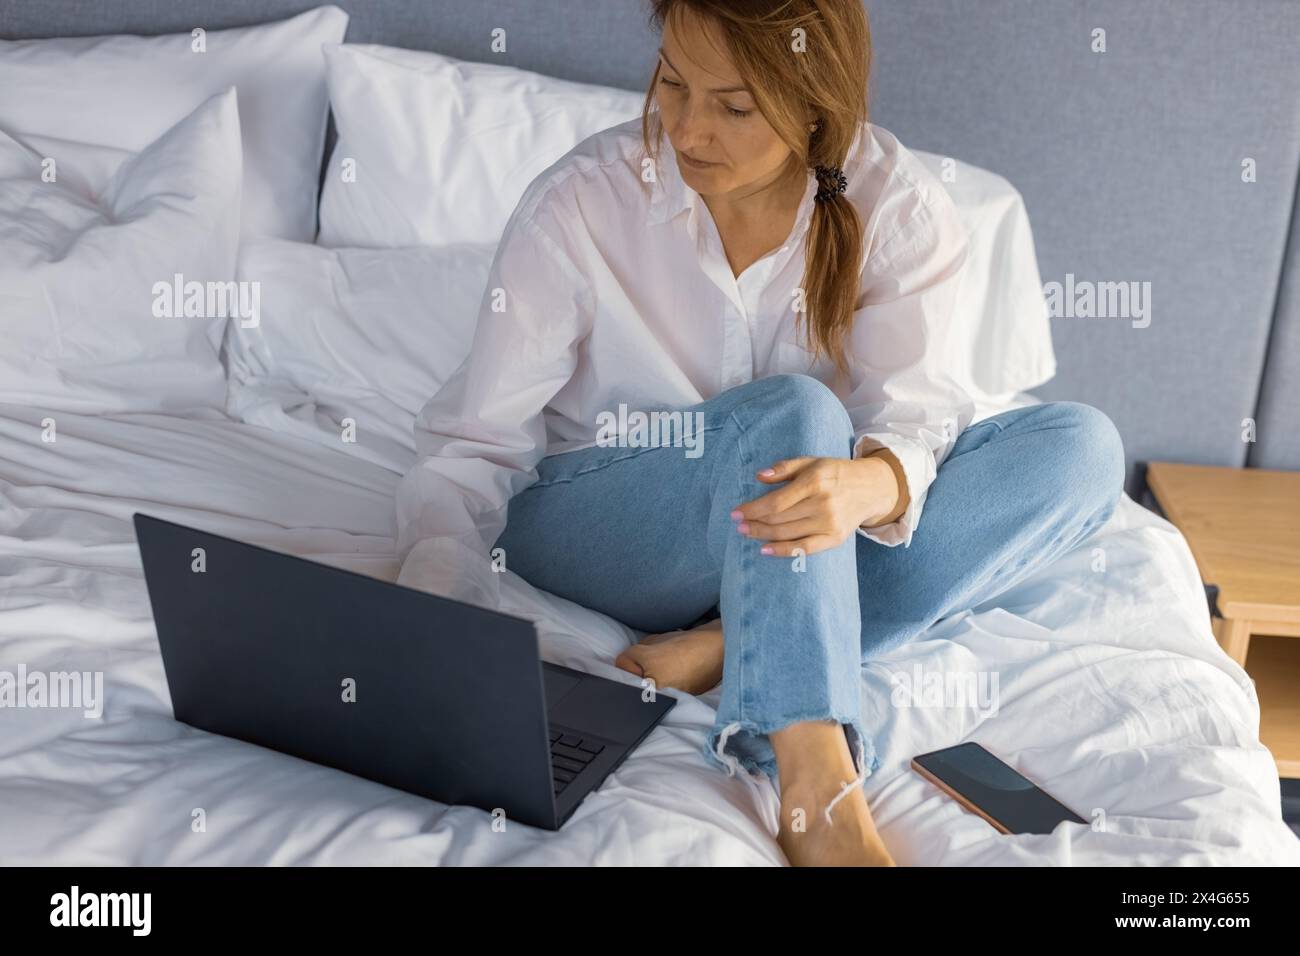 Woman using laptop working on bed at home. Stock Photo